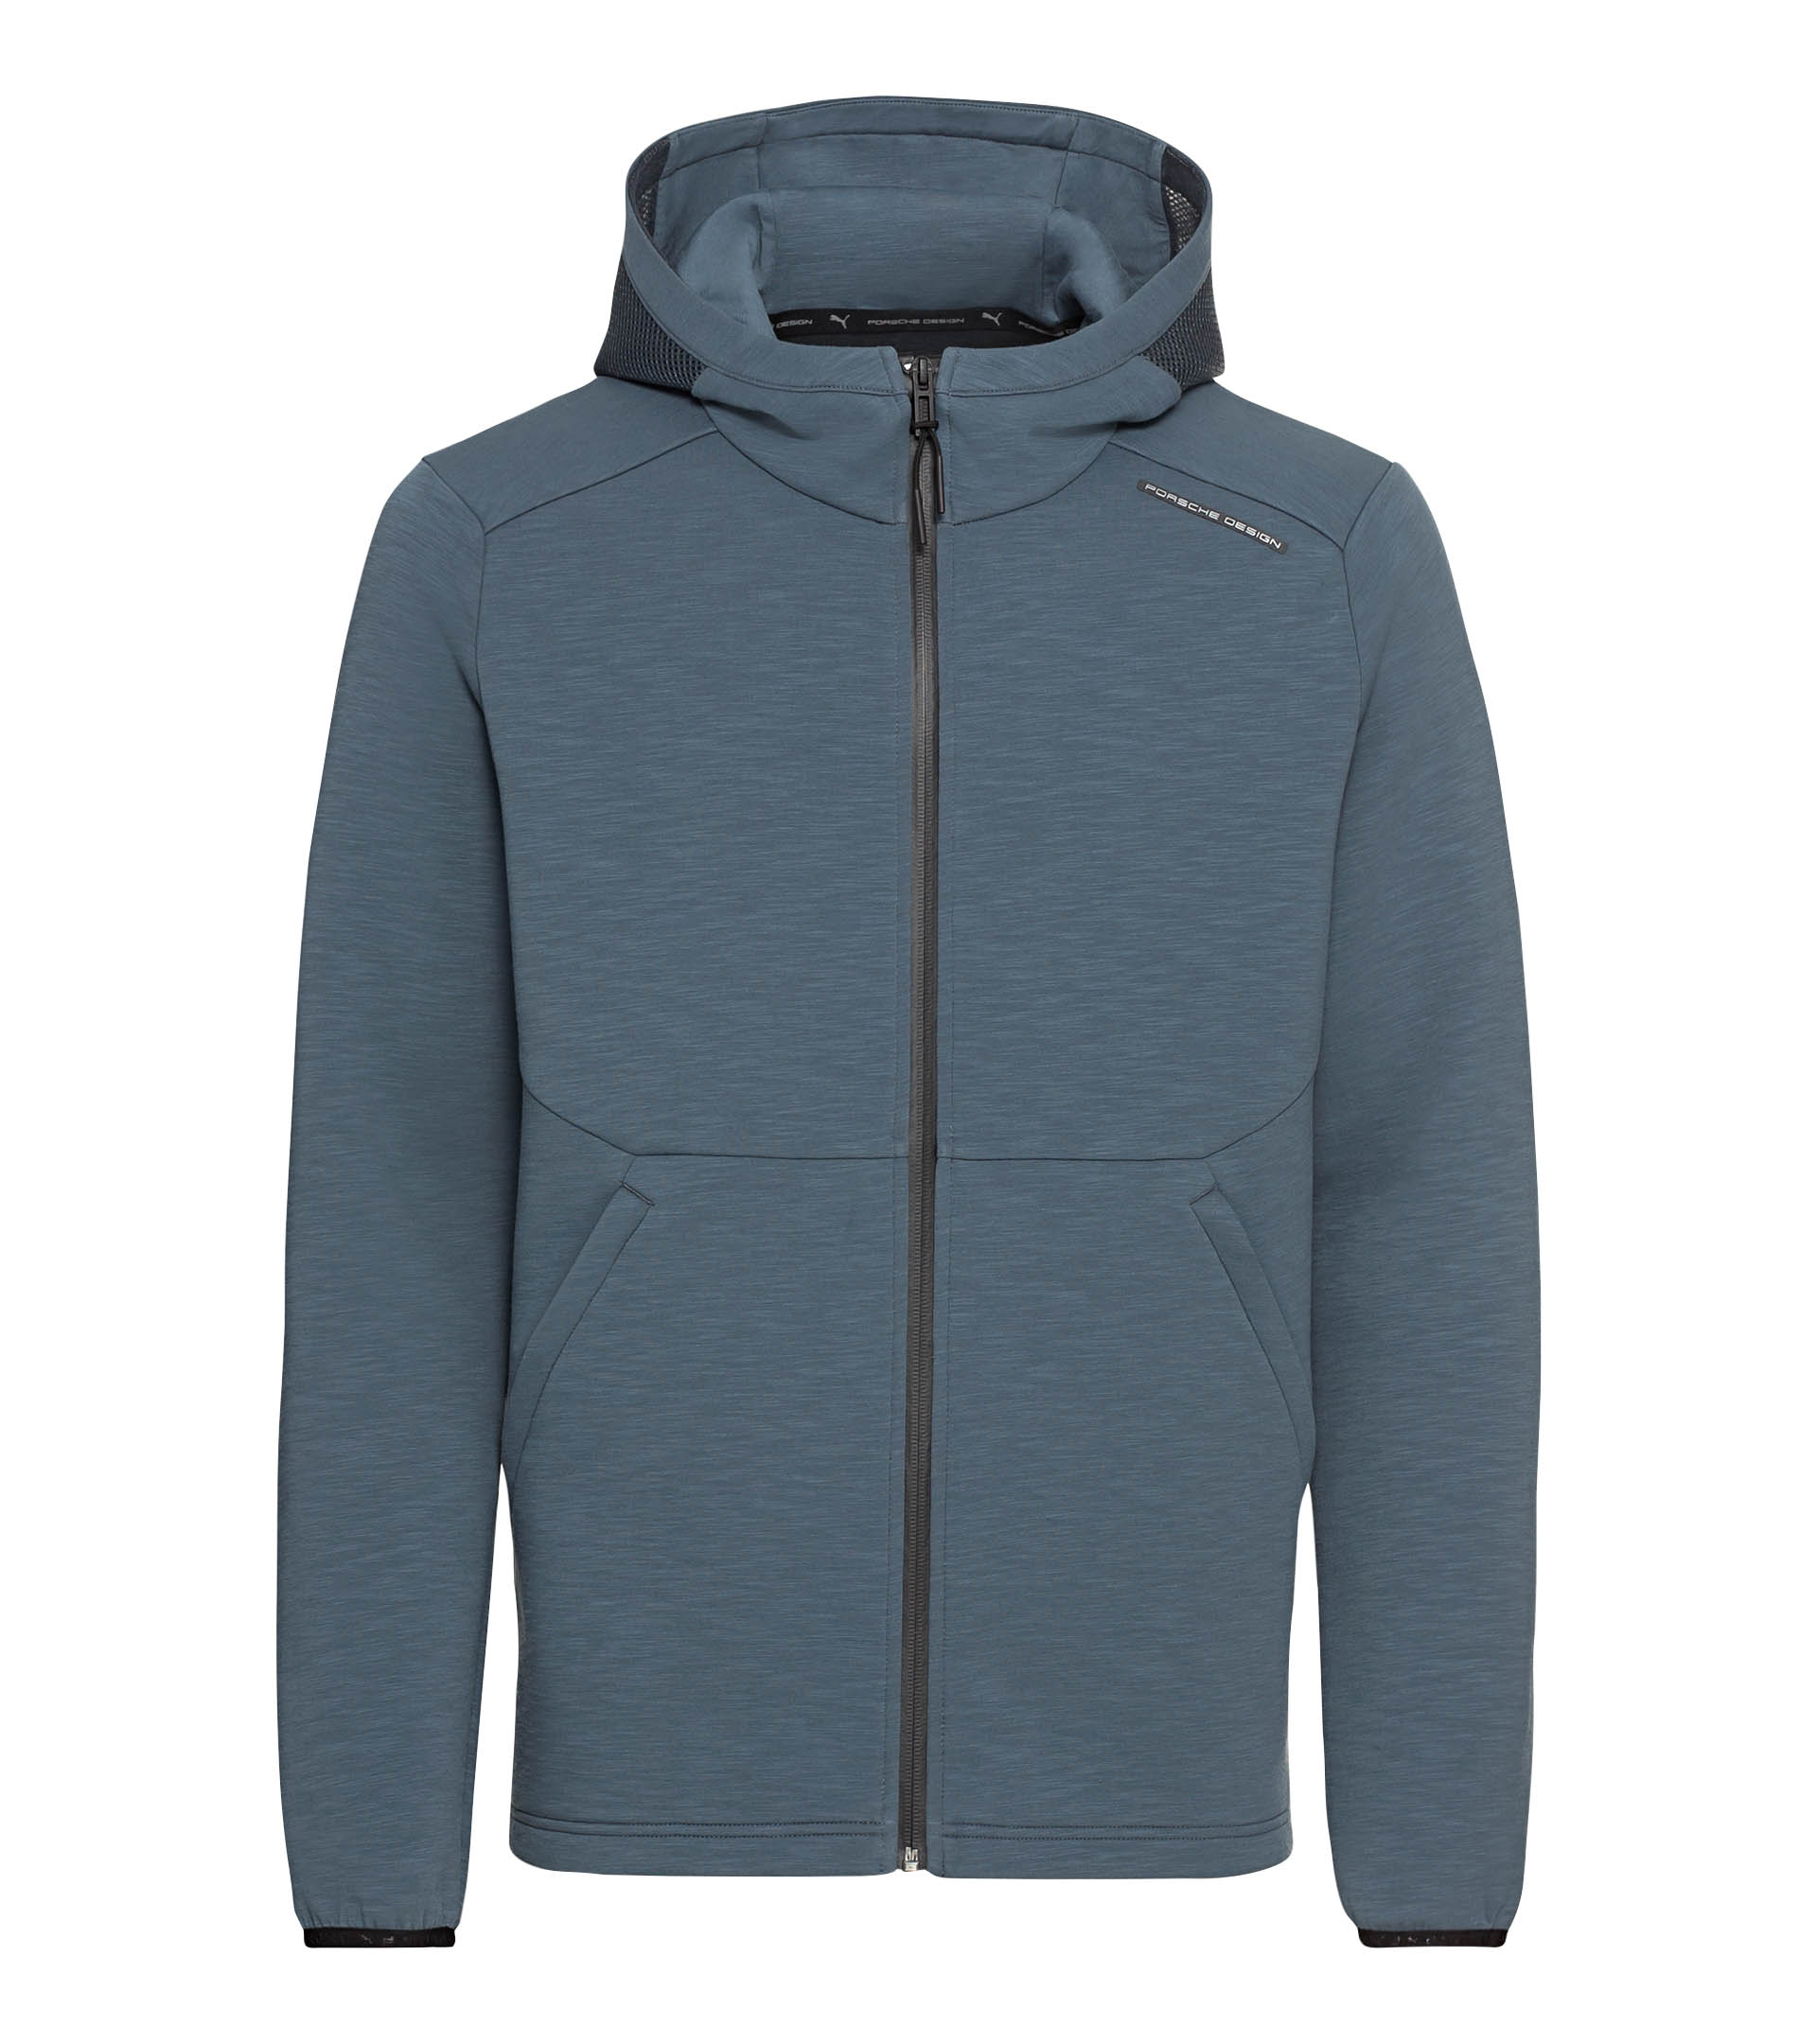 RCT Hooded Sweat Jacket - Luxury Functional Jackets for Men | Porsche ...